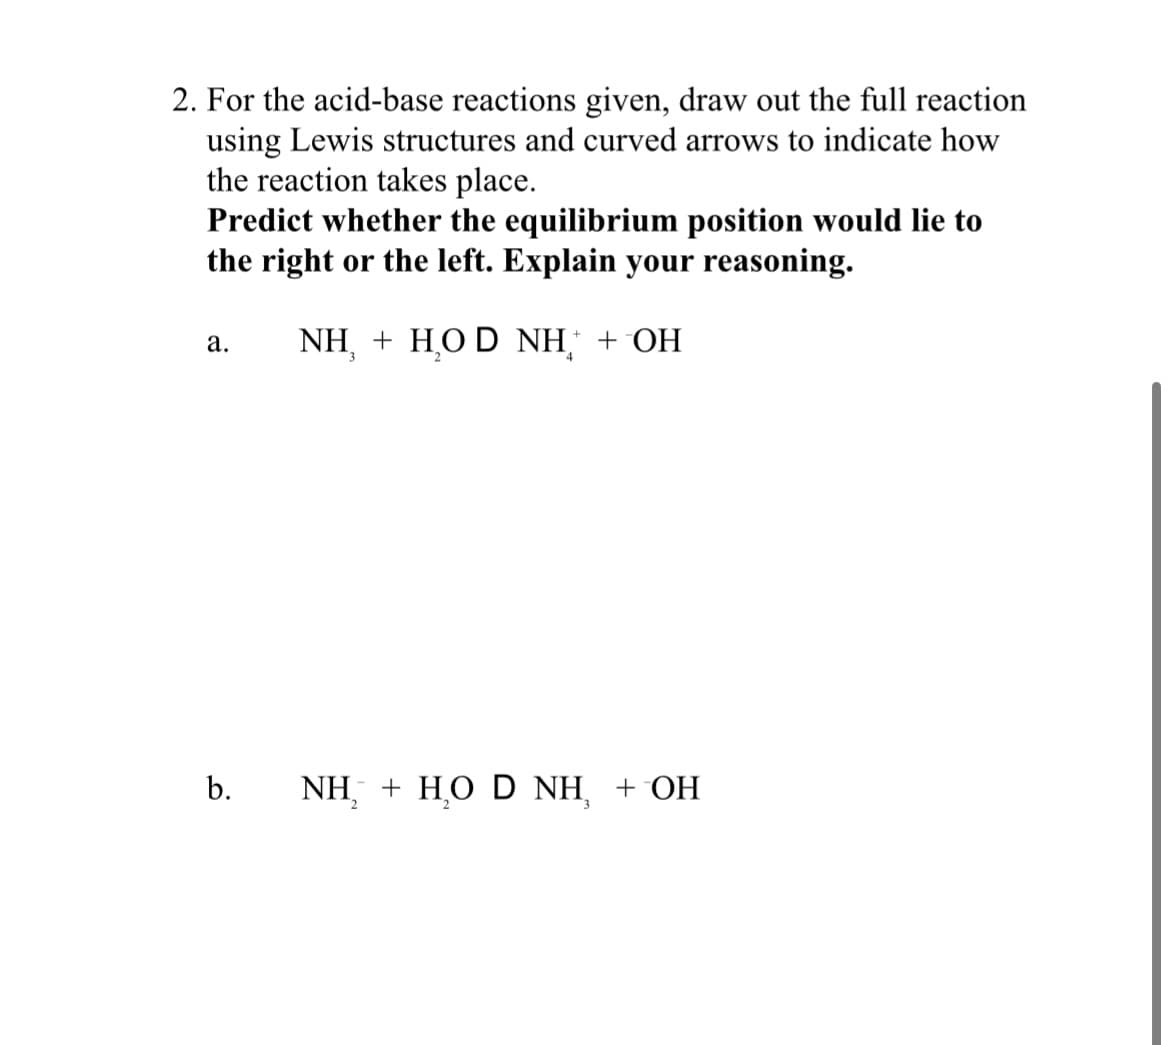 2. For the acid-base reactions given, draw out the full reaction
using Lewis structures and curved arrows to indicate how
the reaction takes place.
Predict whether the equilibrium position would lie to
the right or the left. Explain your reasoning.
NH, + HOD NH +OH
a.
b.
NH, + HO D NH + OH